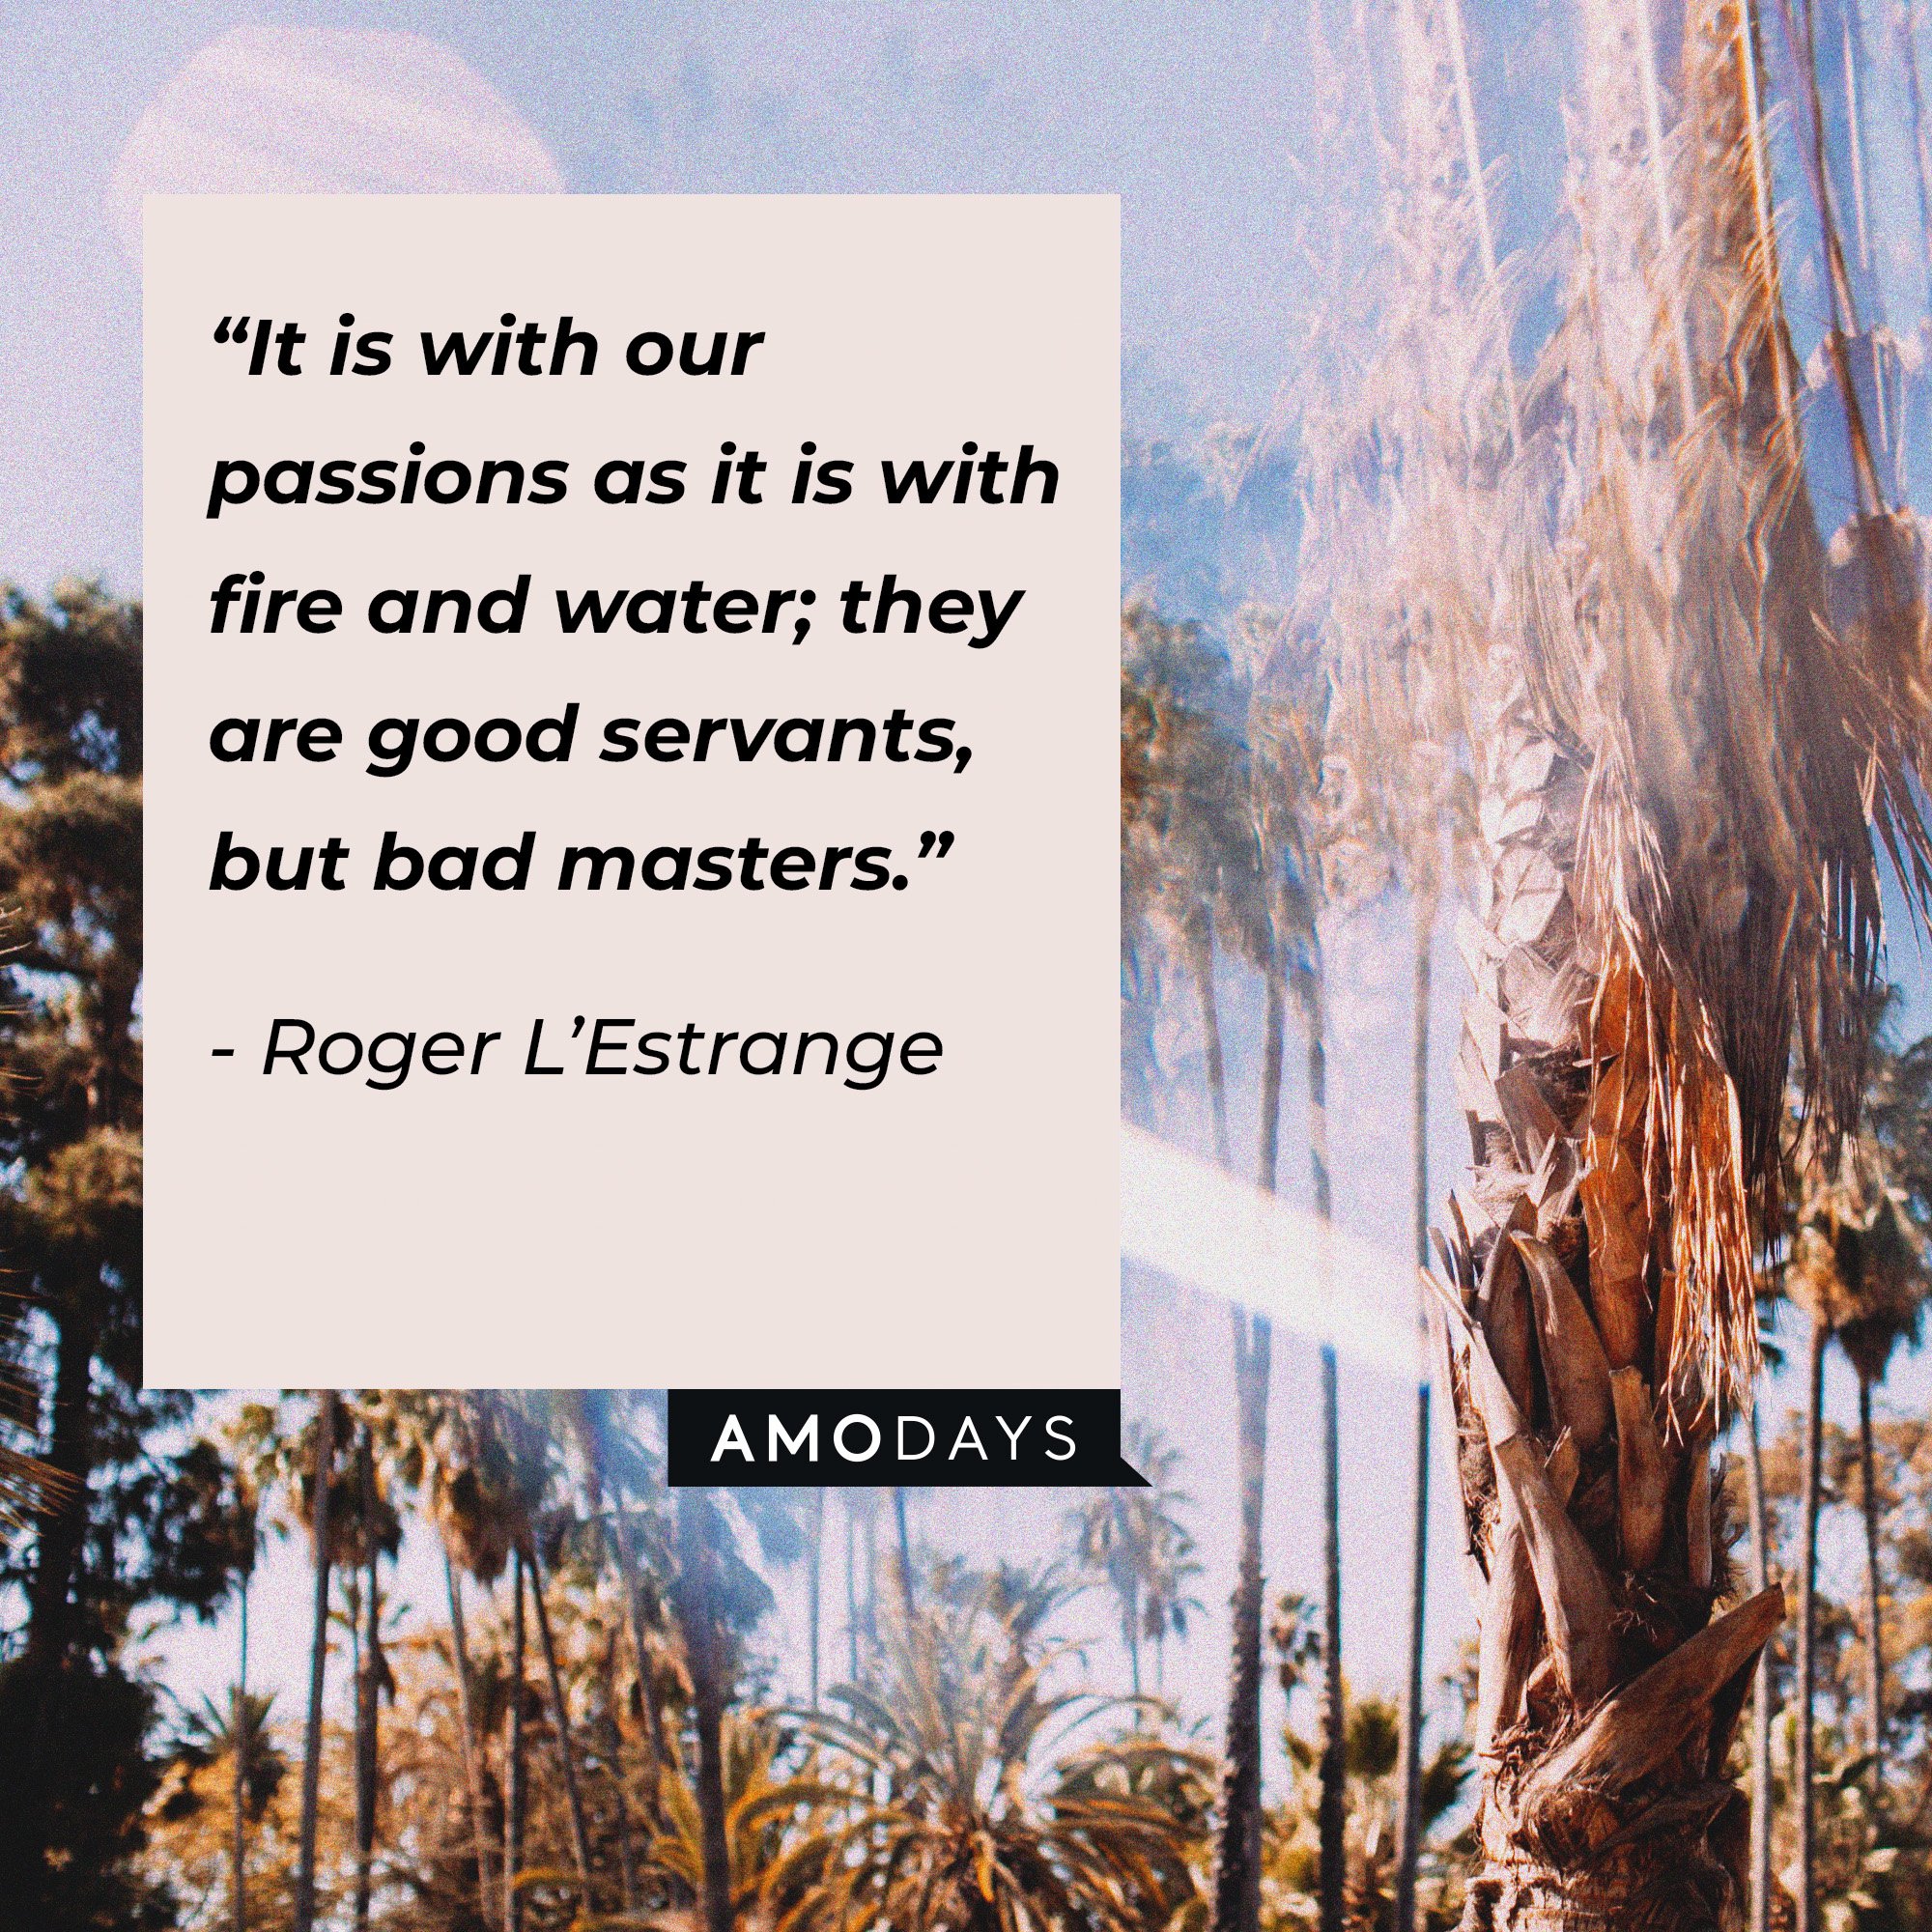 Roger L’Estrange's quote: “It is with our passions as it is with fire and water; they are good servants, but bad masters.” | Image: AmoDays